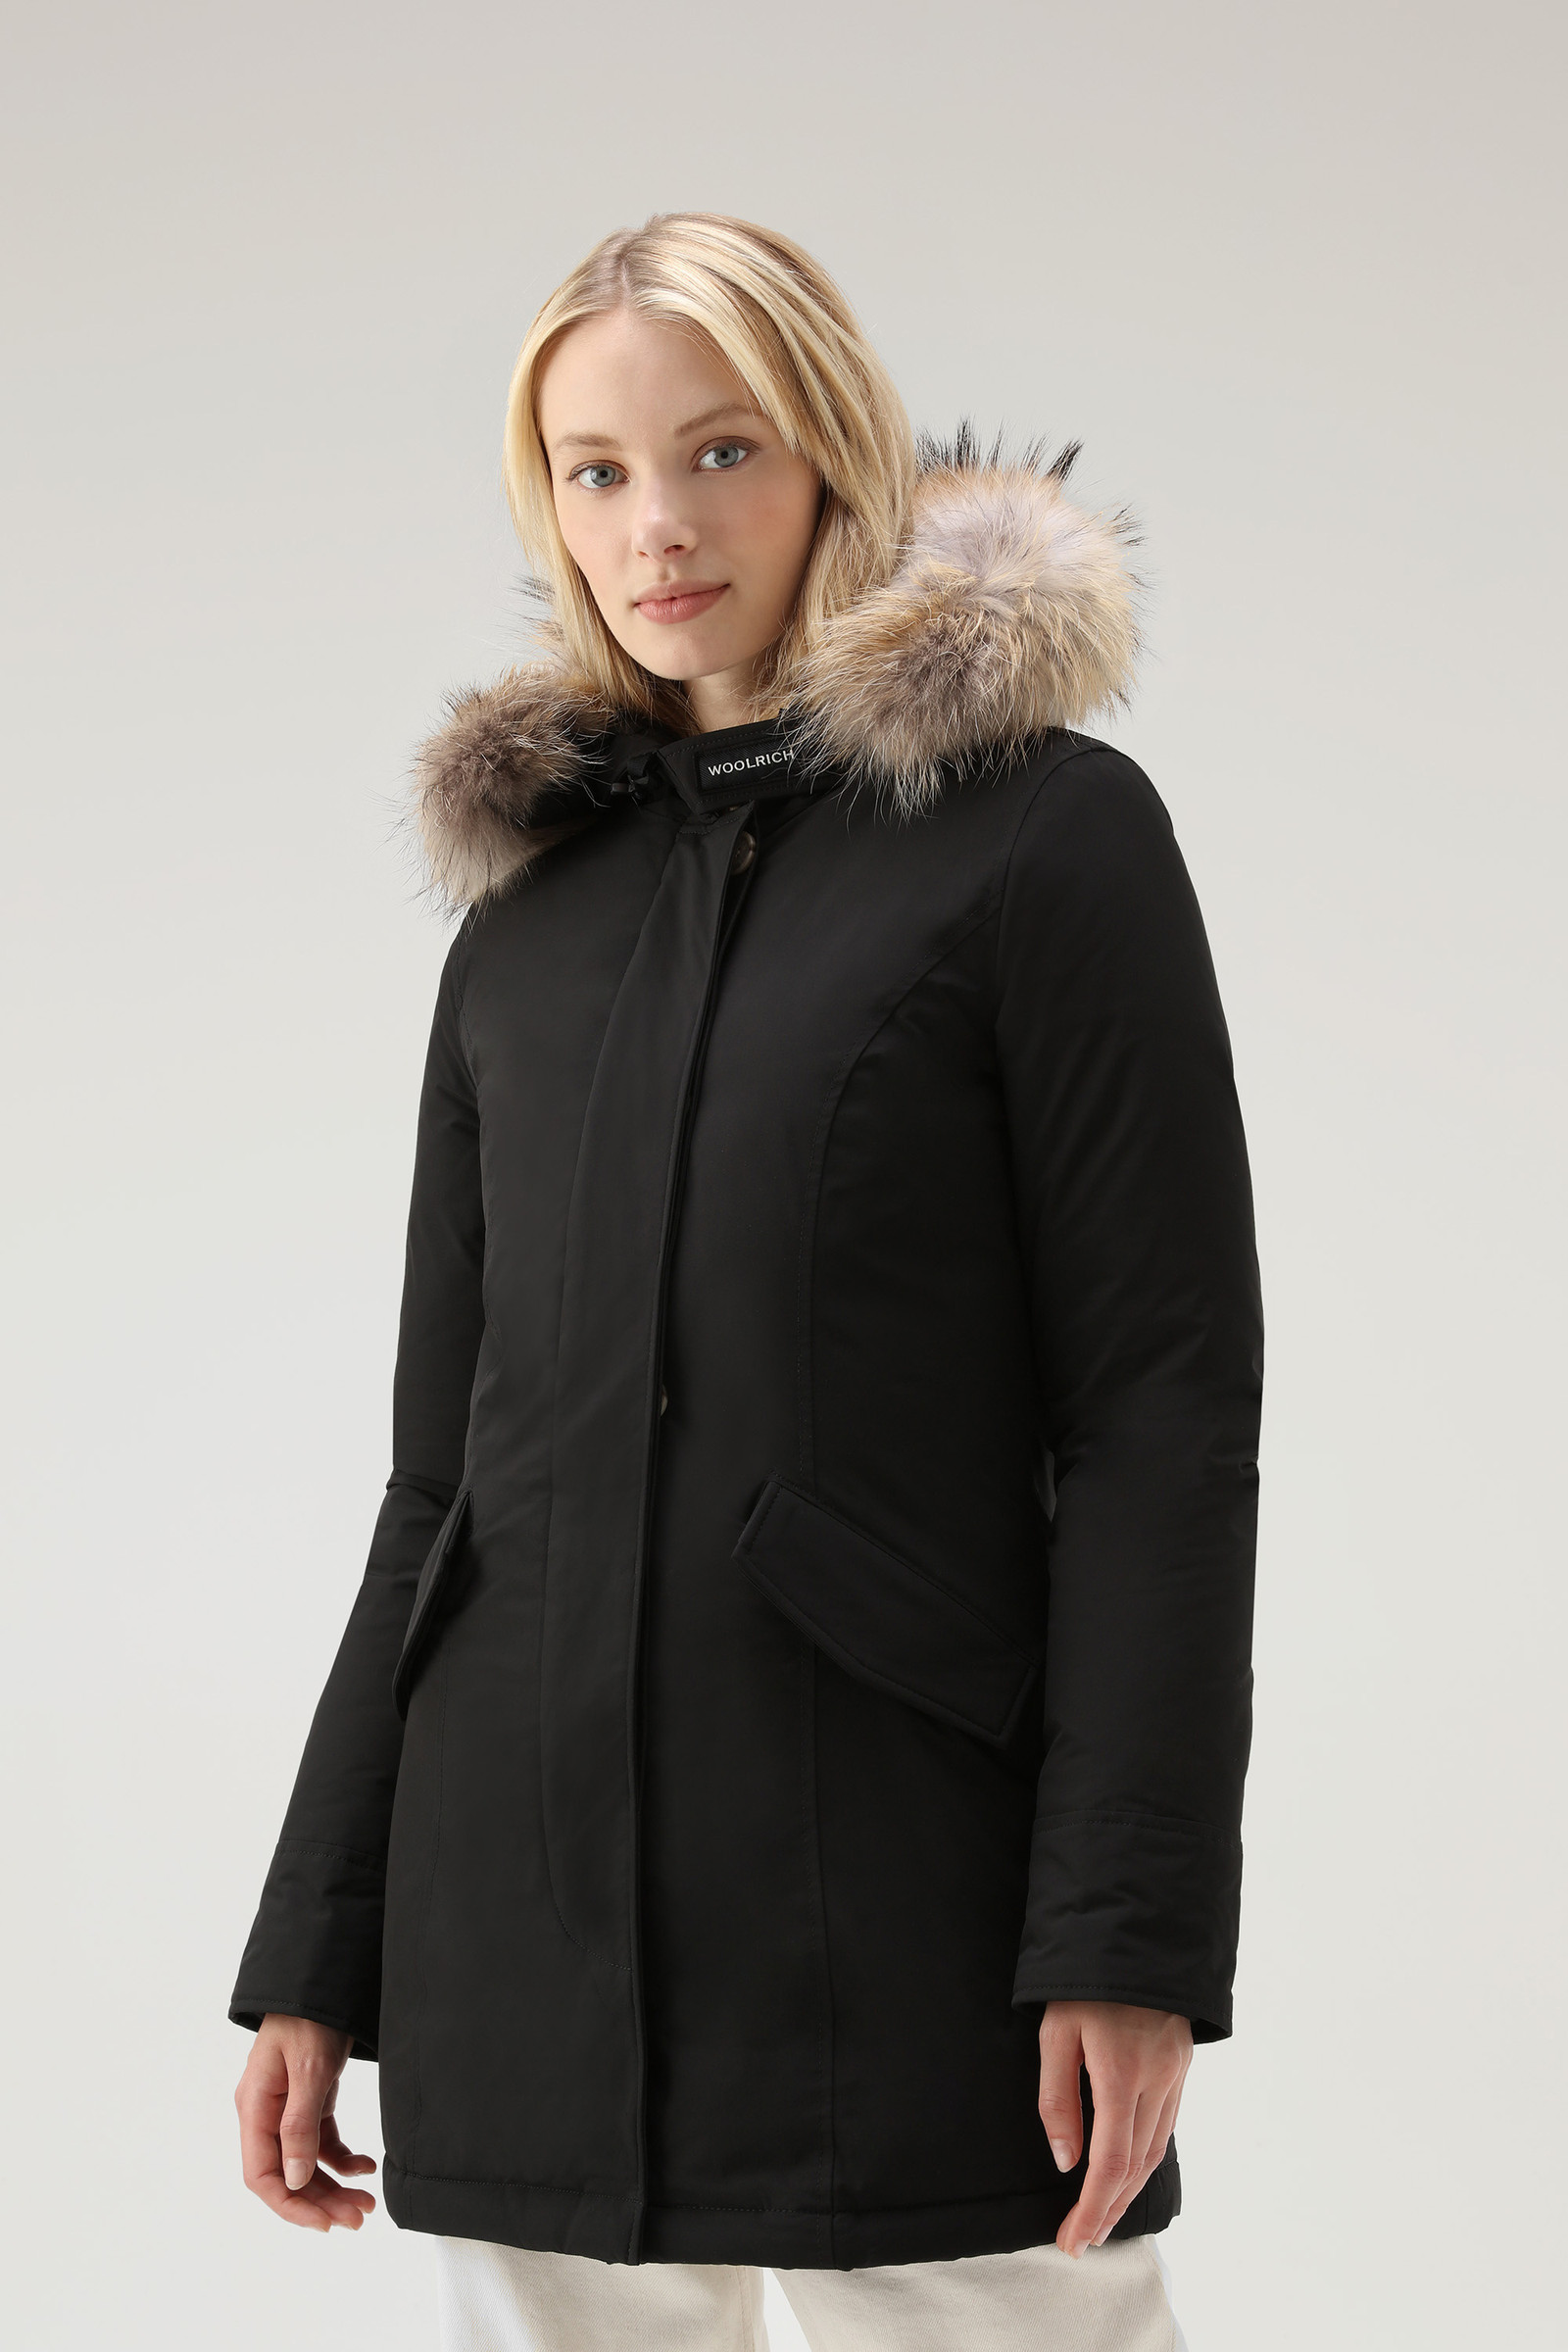 Arctic Parka in Urban Touch with Detachable Fur Black | Woolrich USA